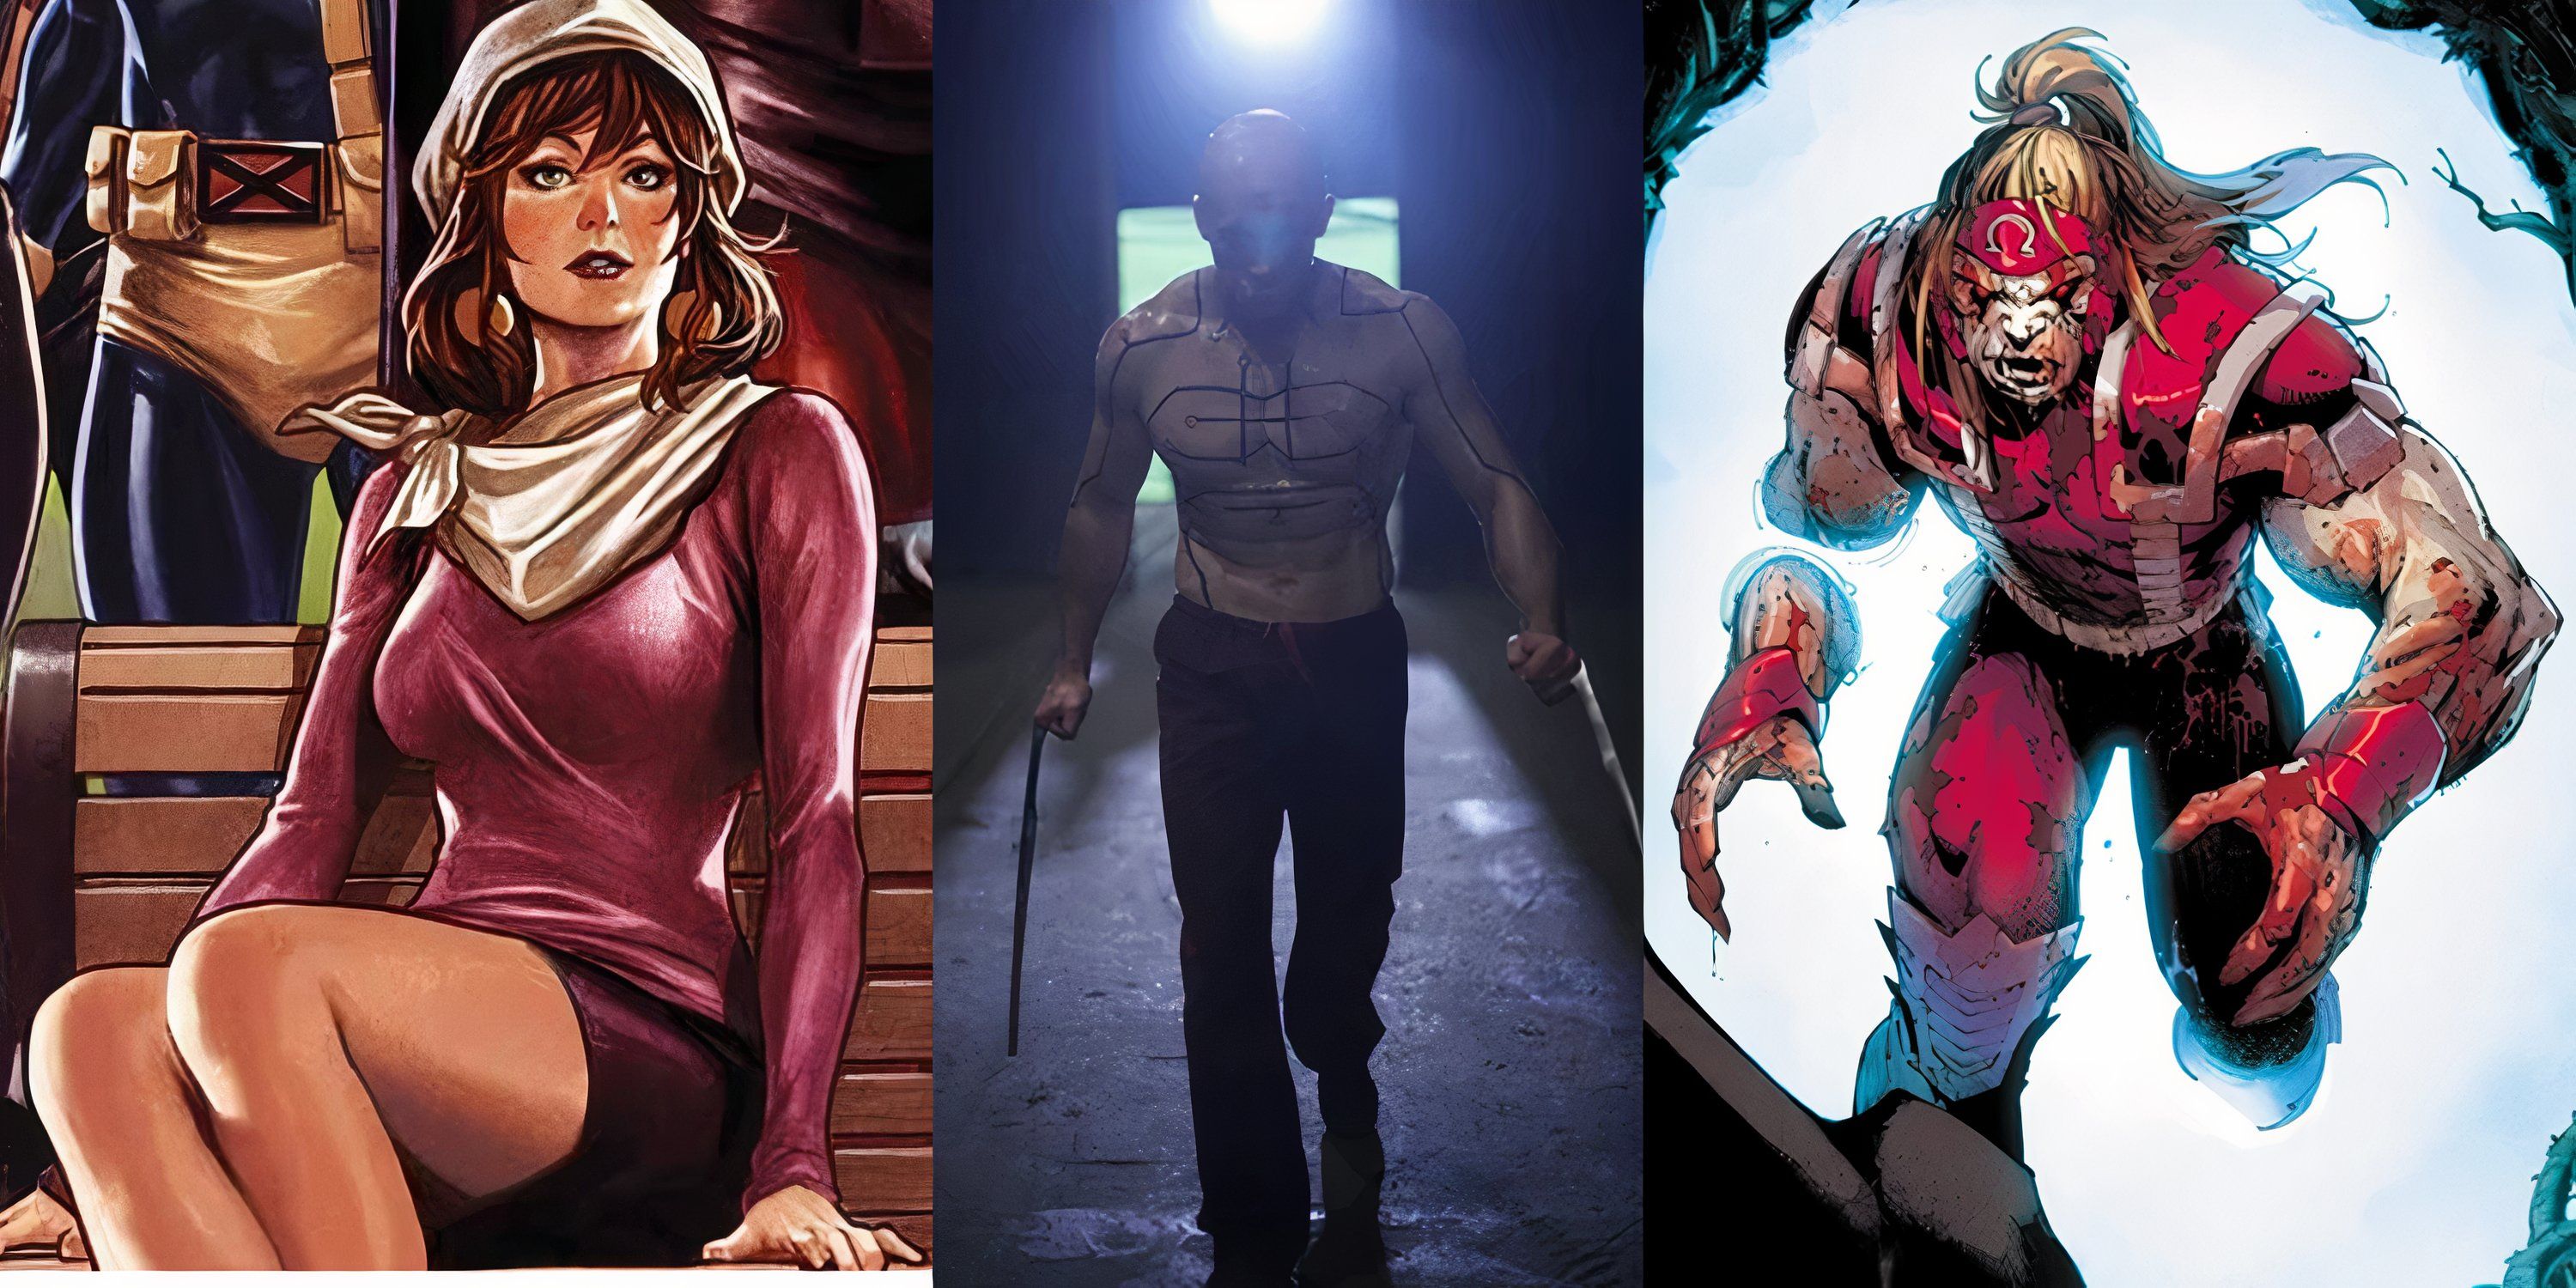 A collage of 3 characters that Wolverine killed